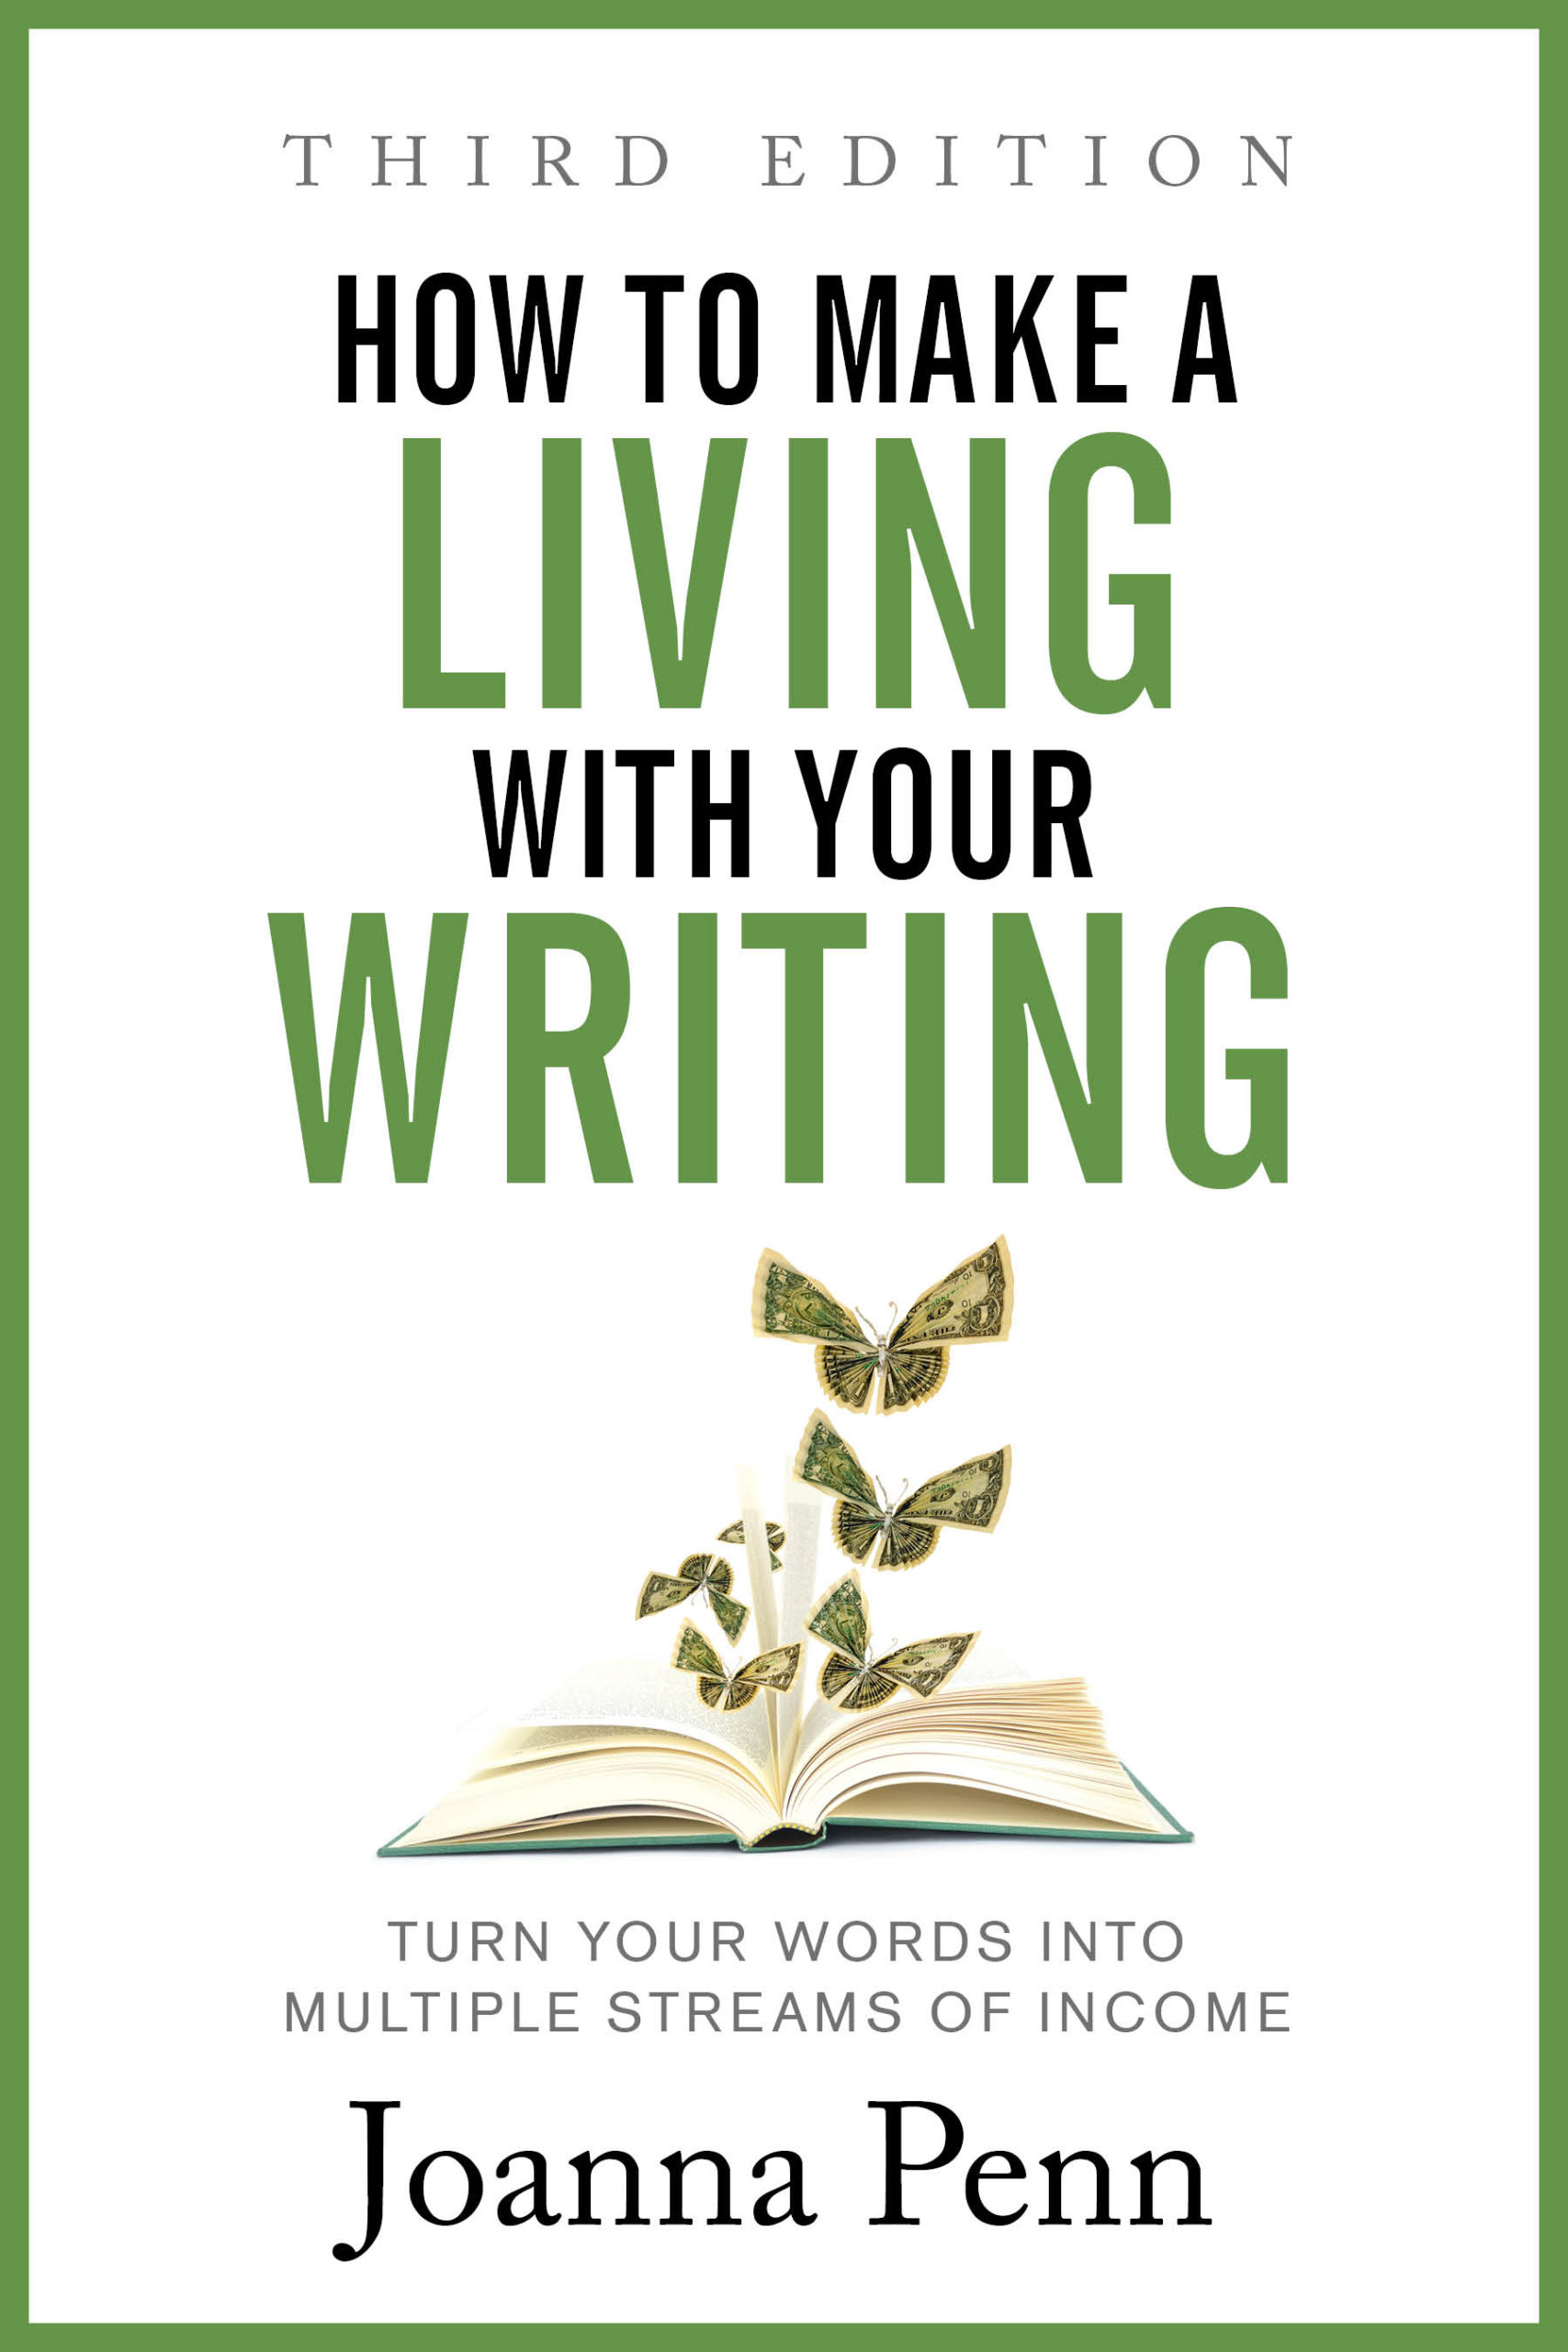 How to Make a Living with Your Writing by Joanna Penn